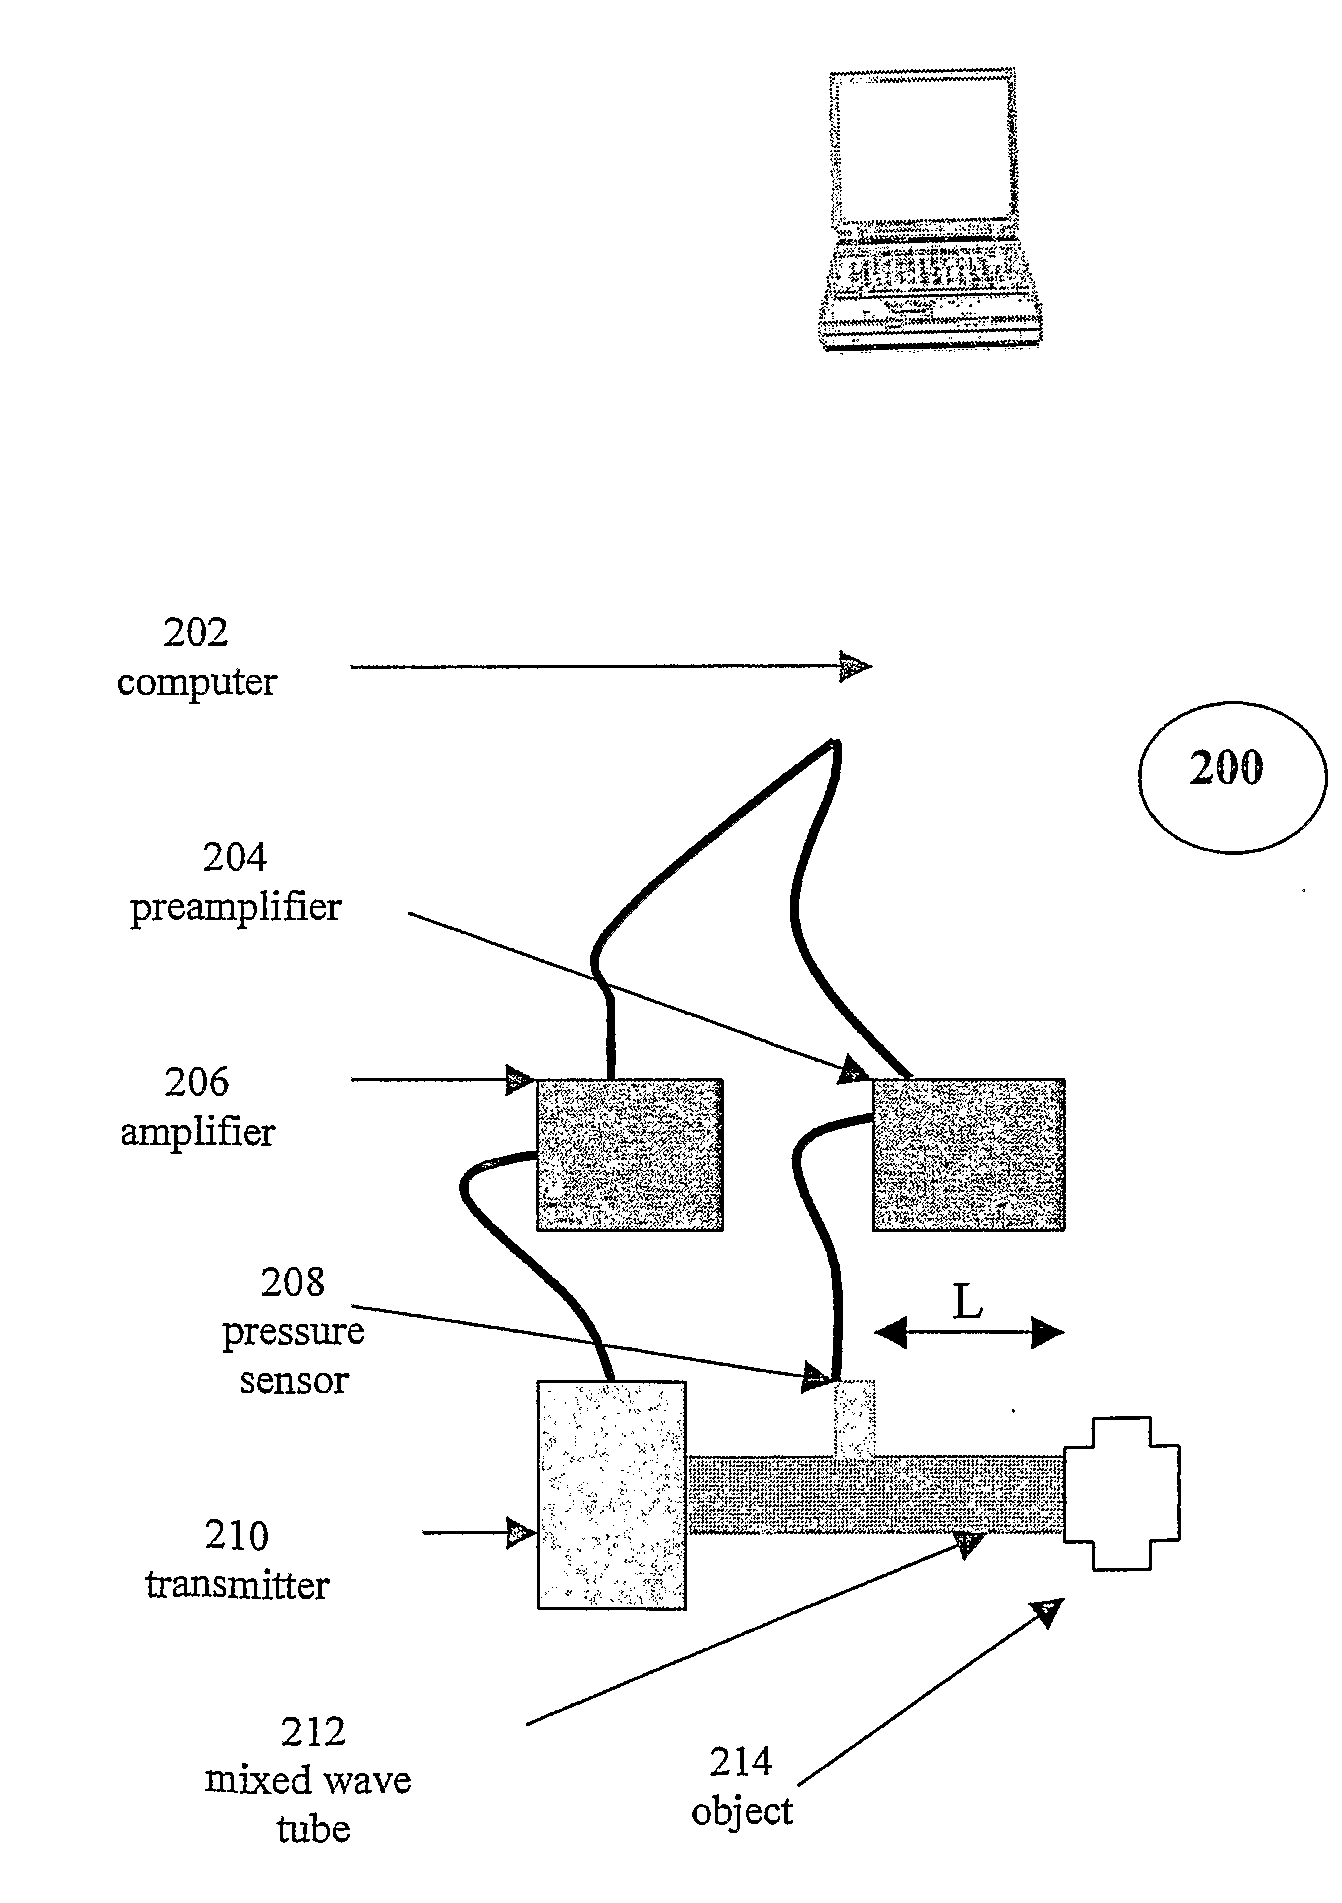 System and Methods For Non-Destructive Testing of Tubular Systems